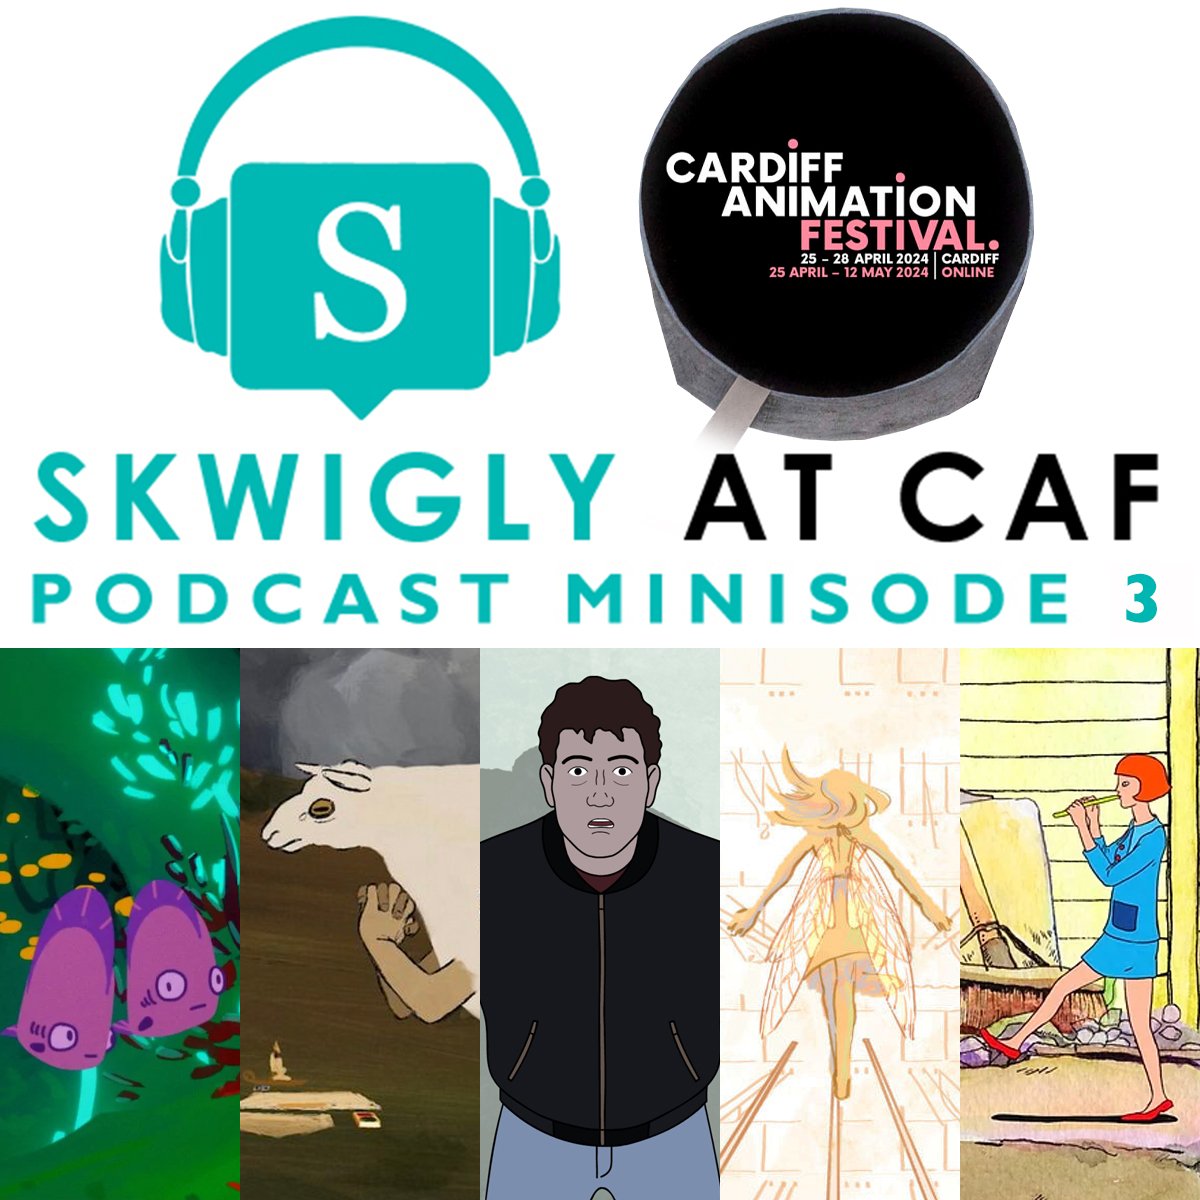 Our @CardiffAnimFest podcast minisodes conclude today with our final Animators Brunch session of 2024! Featuring @ajoshhicks, Hoching Kwok, Gus Andrews, @qianhui_yuu and Best Student Short winner @tovaperson (Offerlamm)